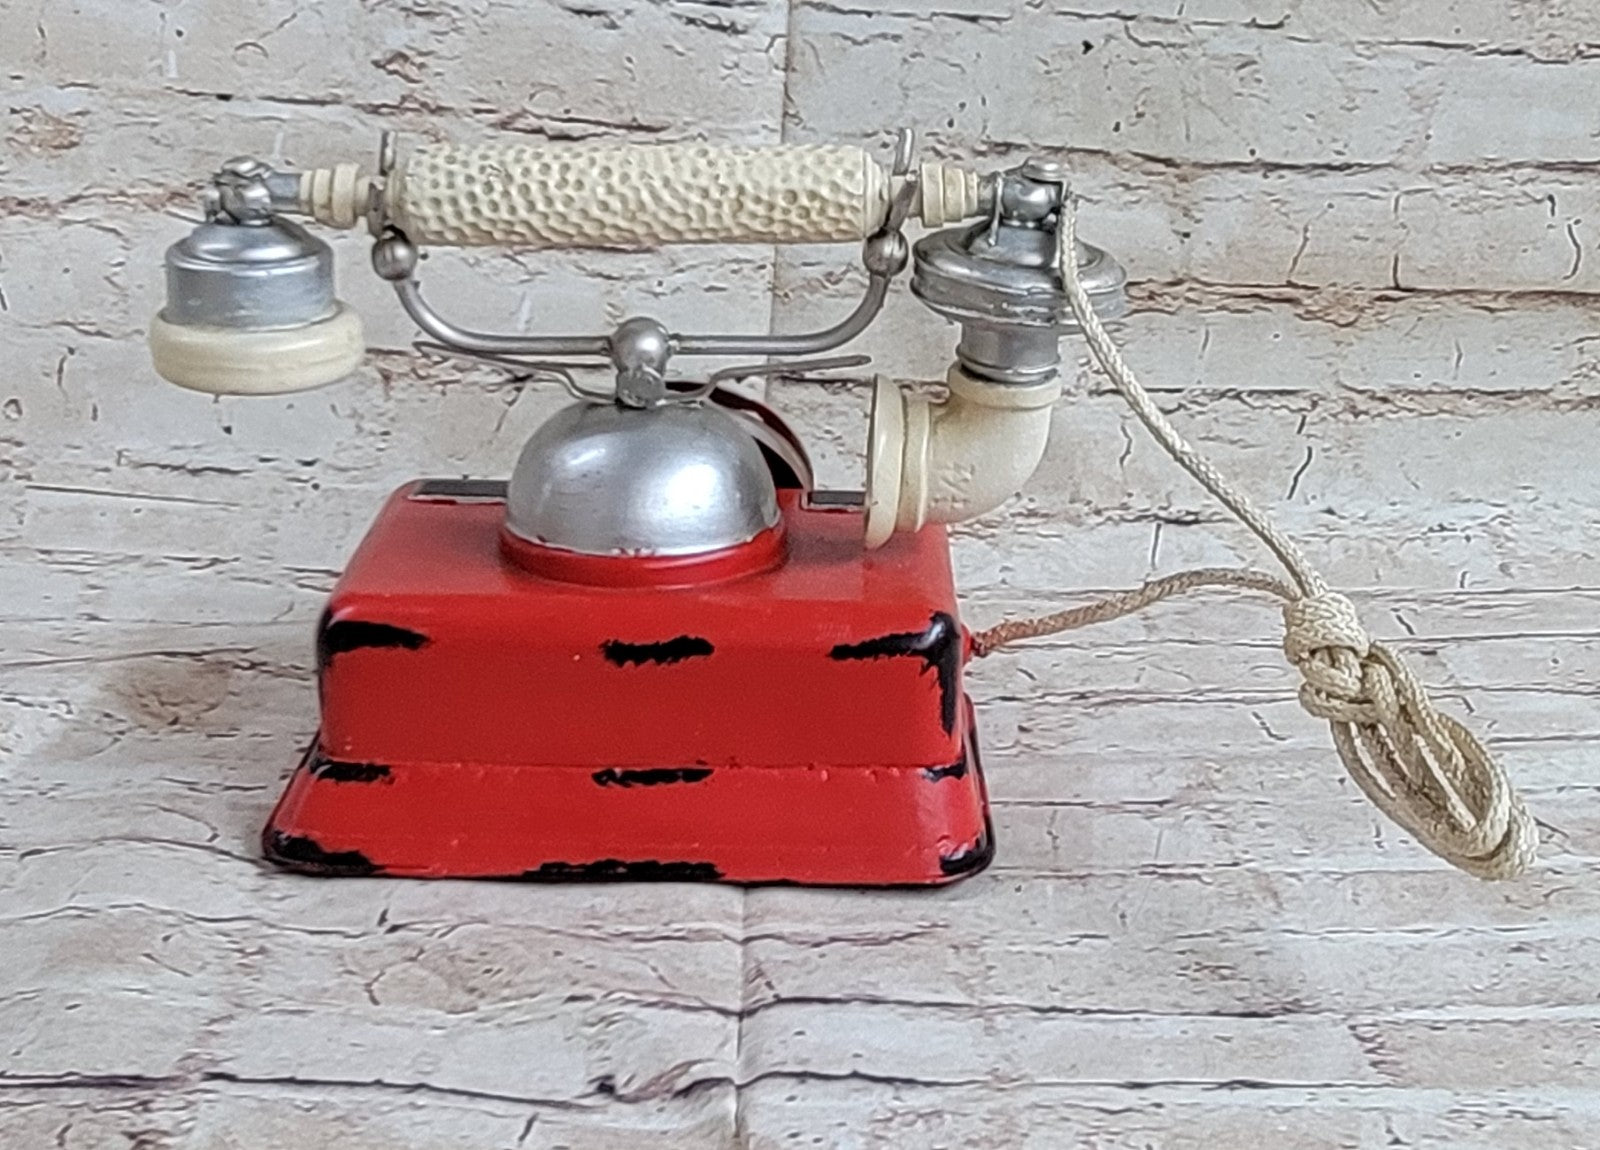 Rotary Dial Telephone Vintage Handset Phone Res Metal For Home Office Classic